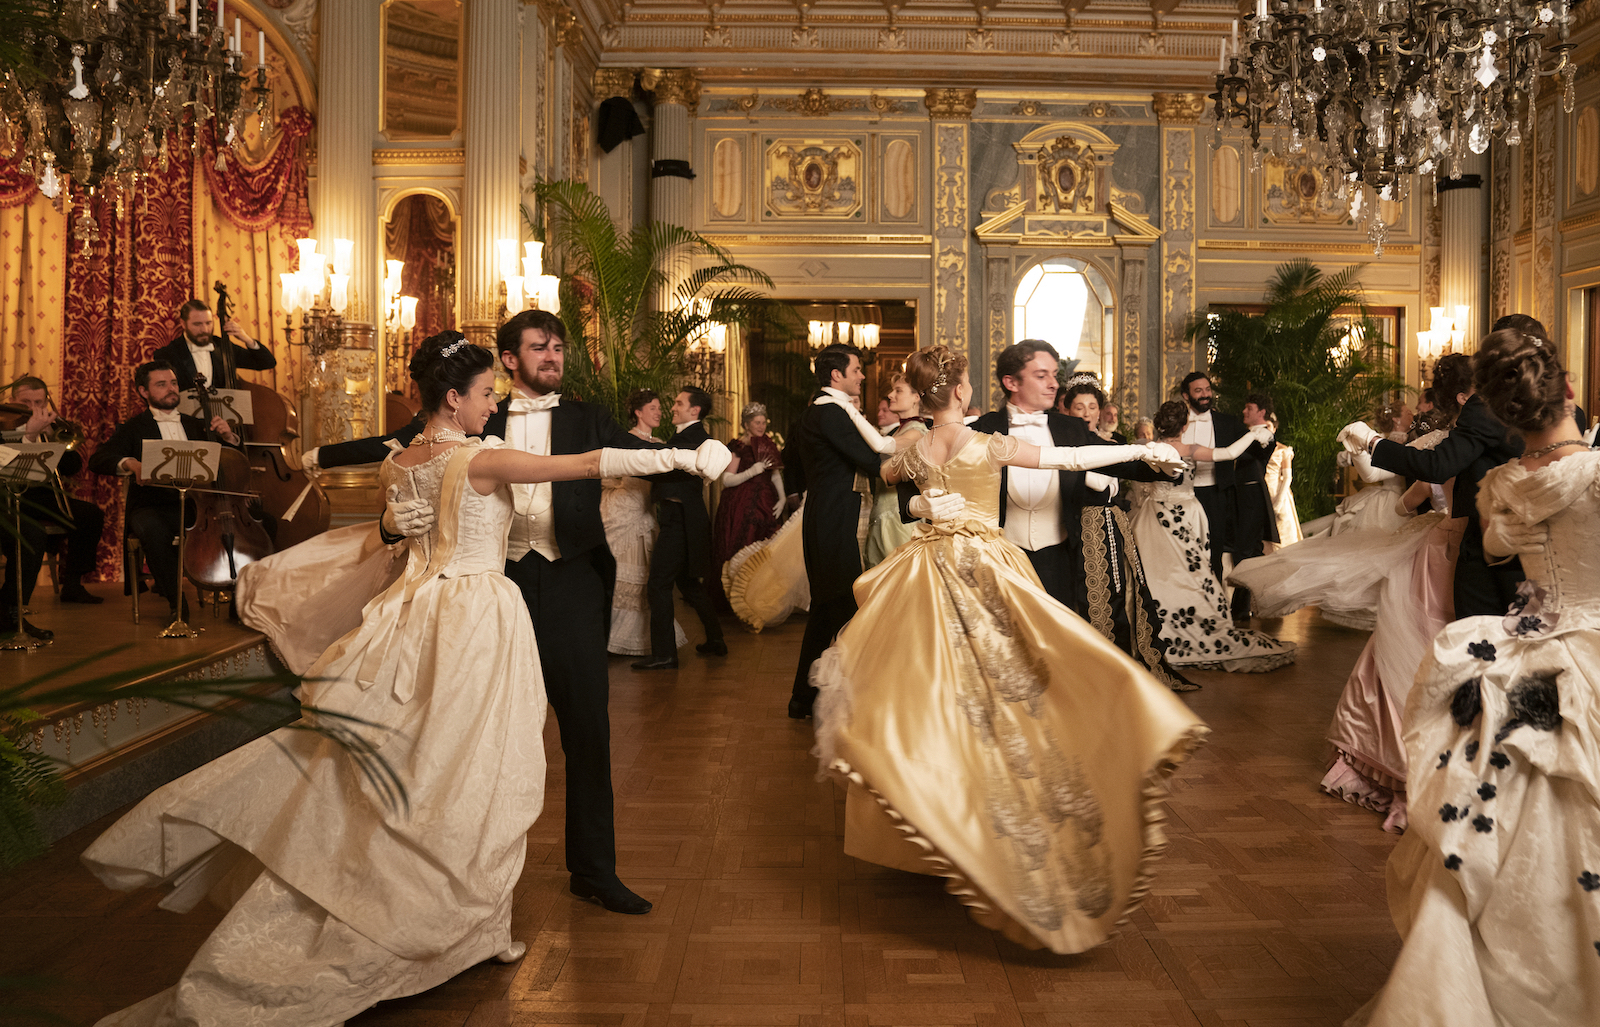 dancers swirling around a Gilded Age ballroom